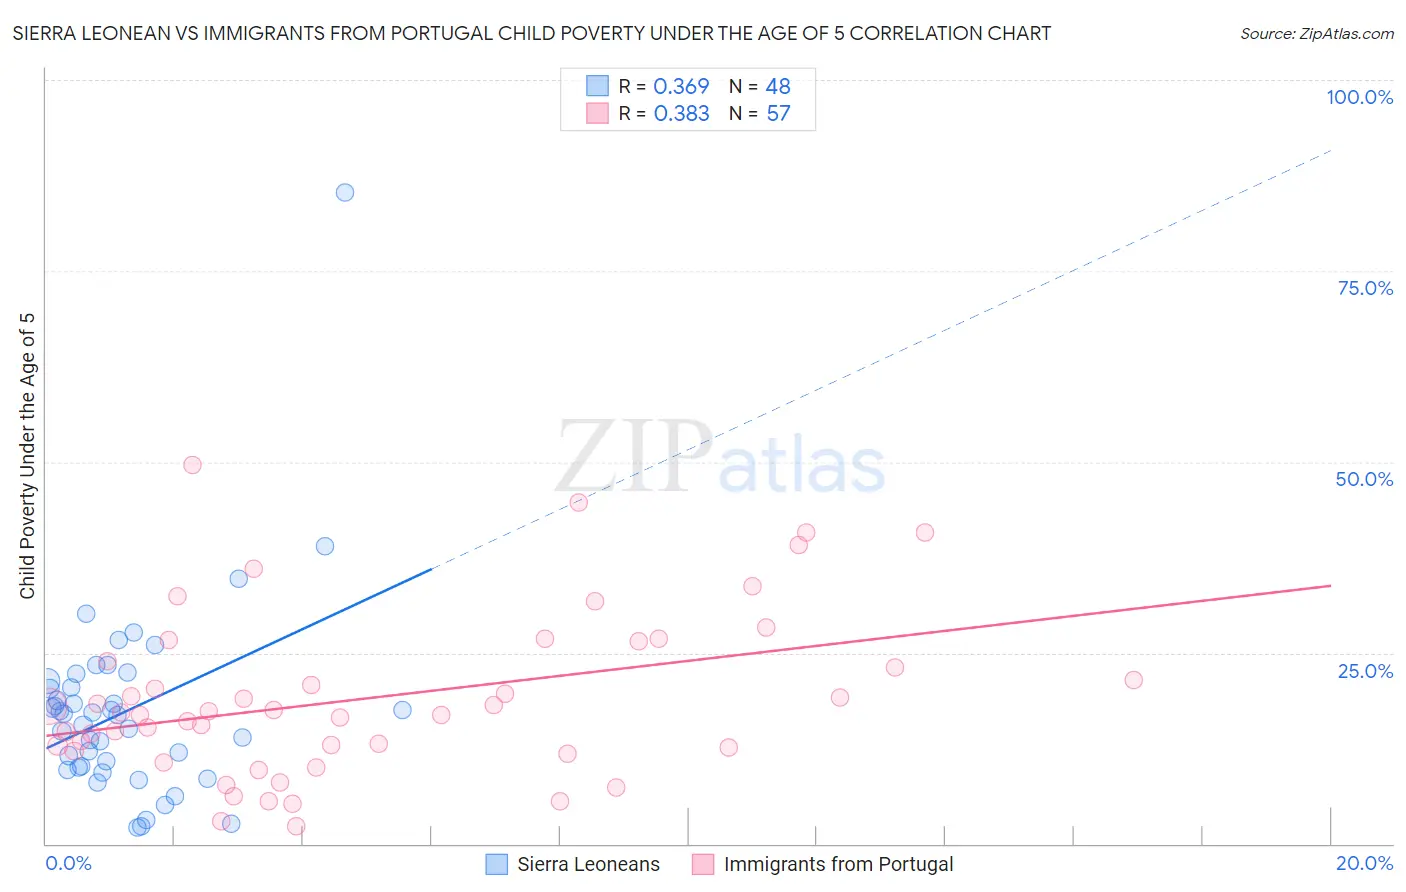 Sierra Leonean vs Immigrants from Portugal Child Poverty Under the Age of 5